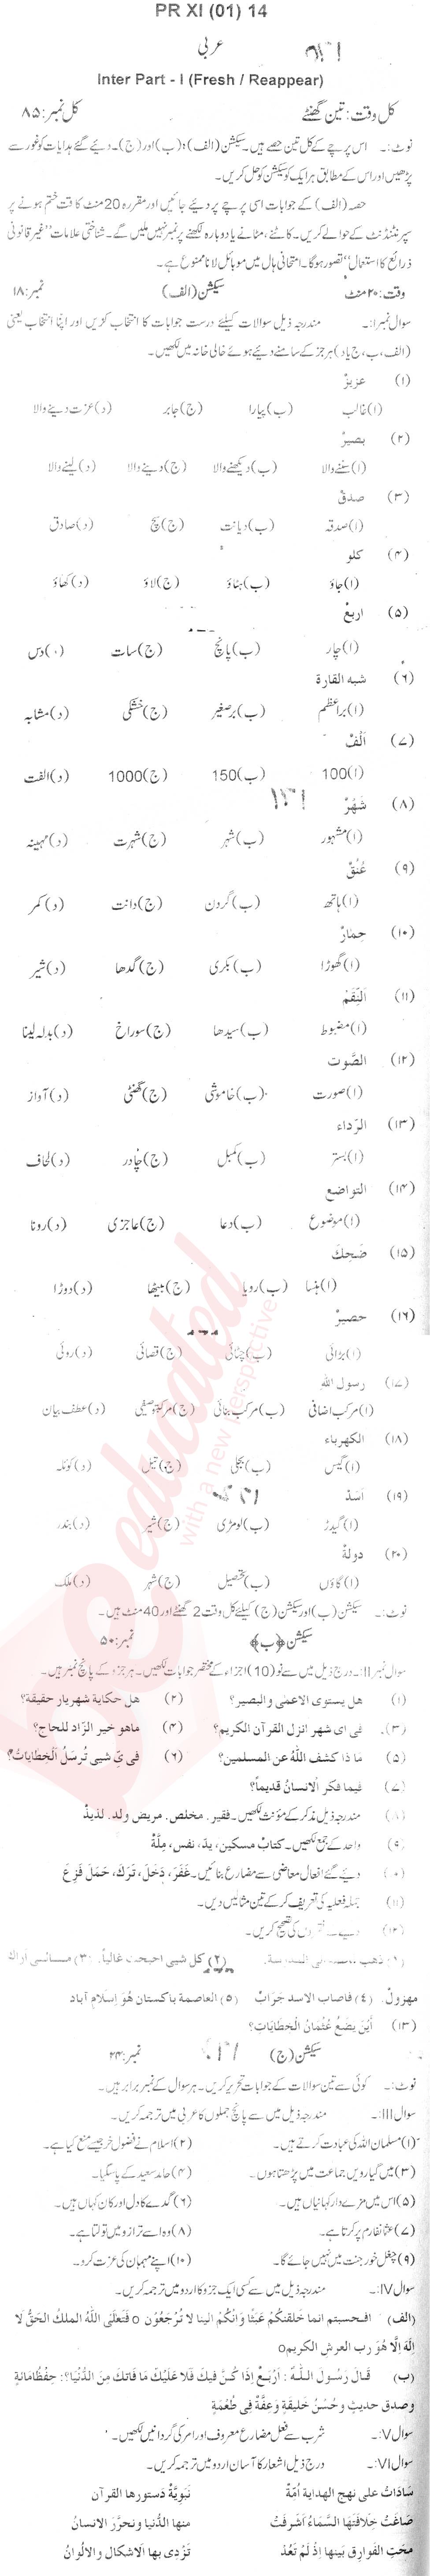 Arabic FA Part 1 Past Paper Group 1 BISE Malakand 2014